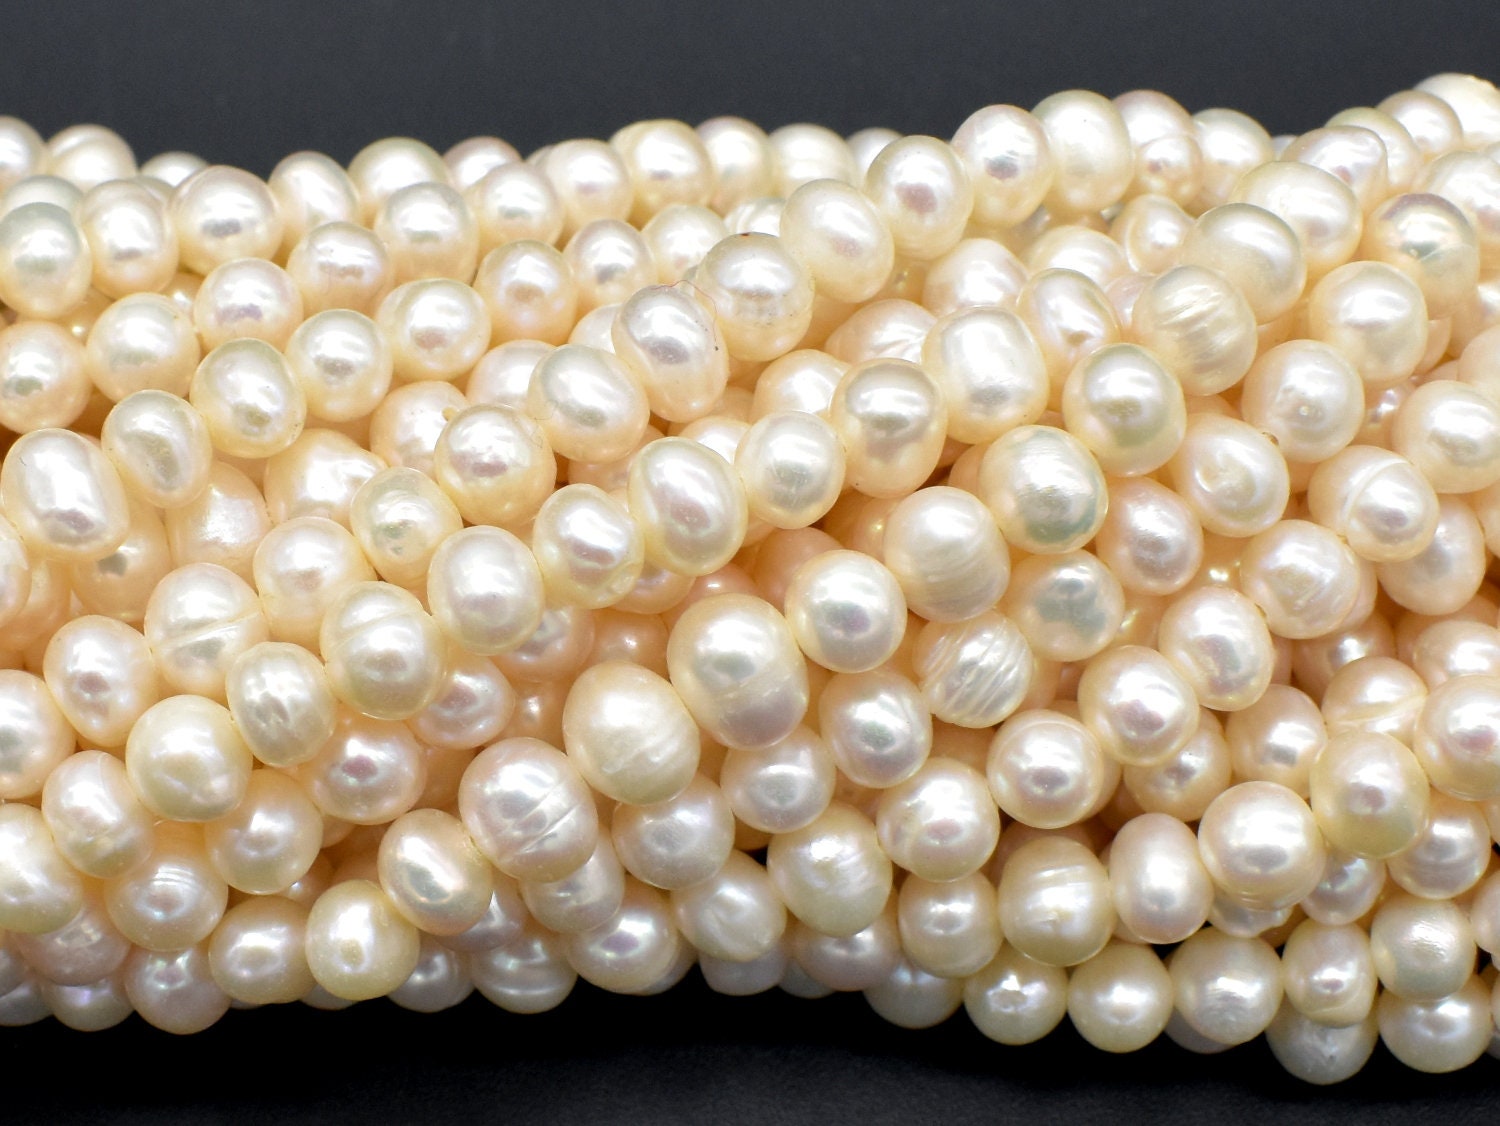 Pearls on a String, Craft Pearls, Pearl Beads ,pack of 12 Strings 